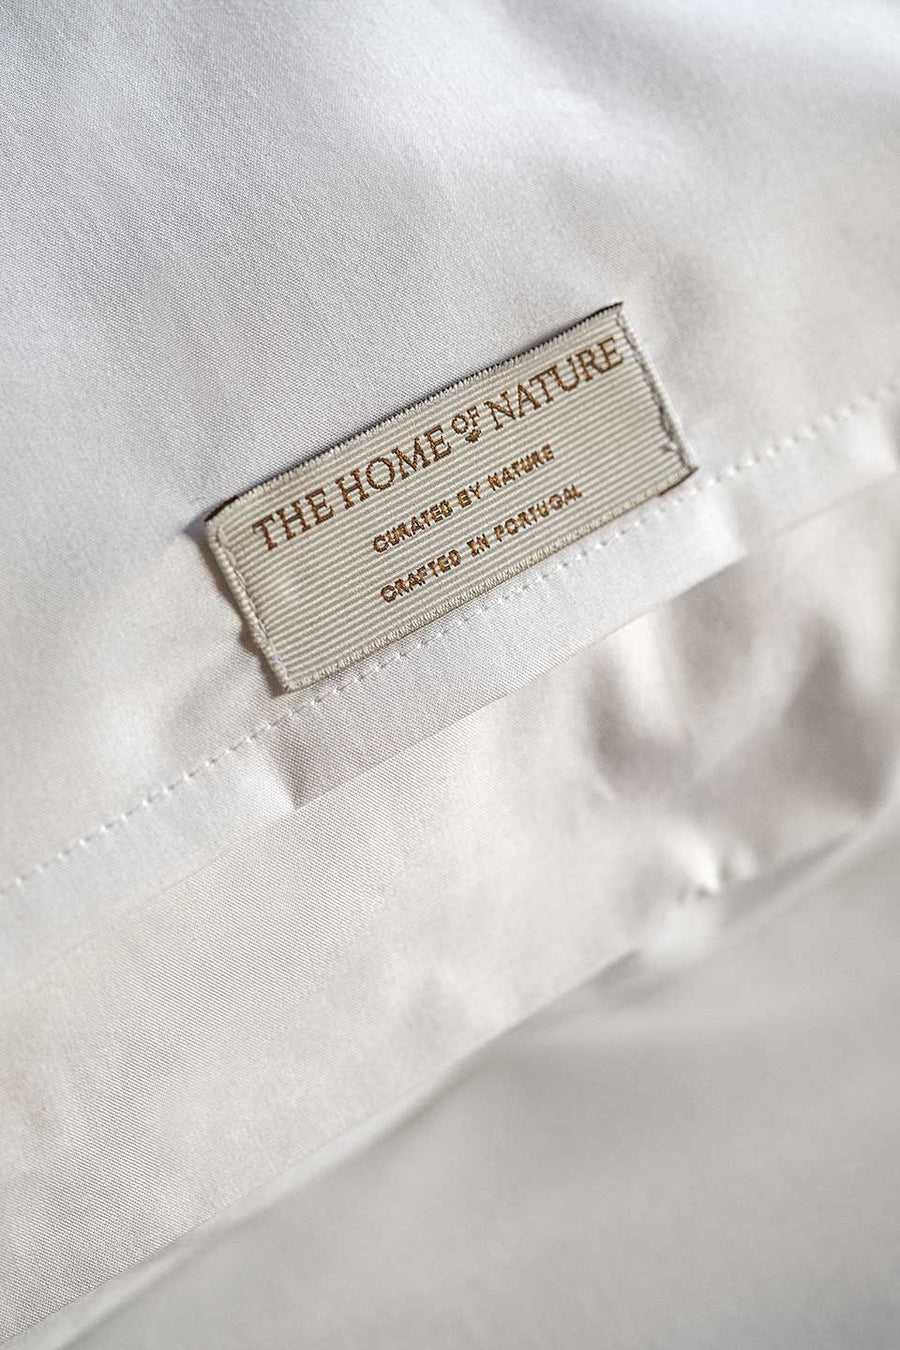 Label from The Nature Home on a white Egyptian Cotton™ Percale pillowcase.